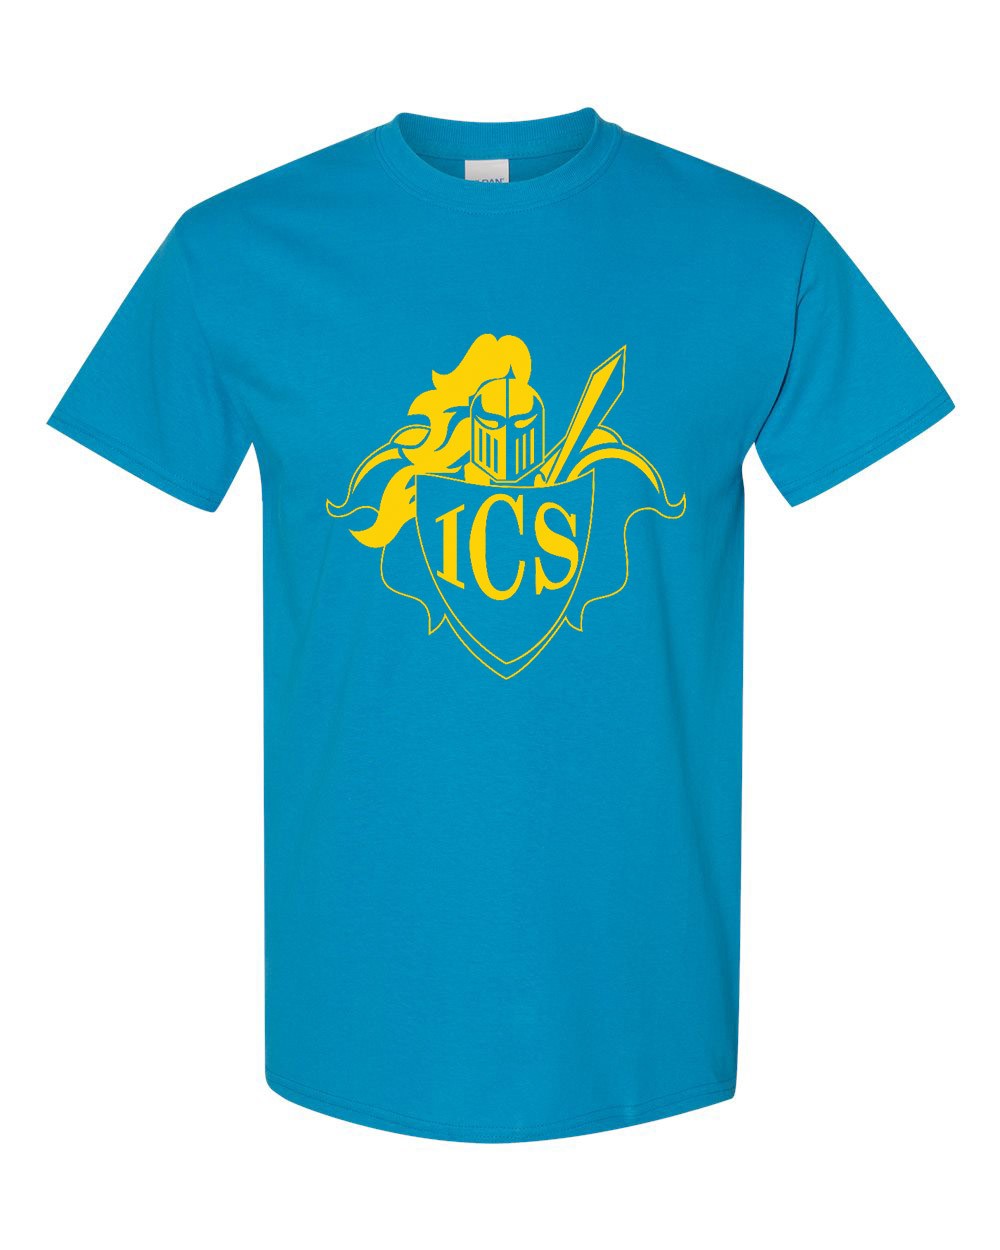 ICS Spirit S/S T-Shirt w/ Yellow Logo #4 - Please Allow 2-3 Weeks for Delivery